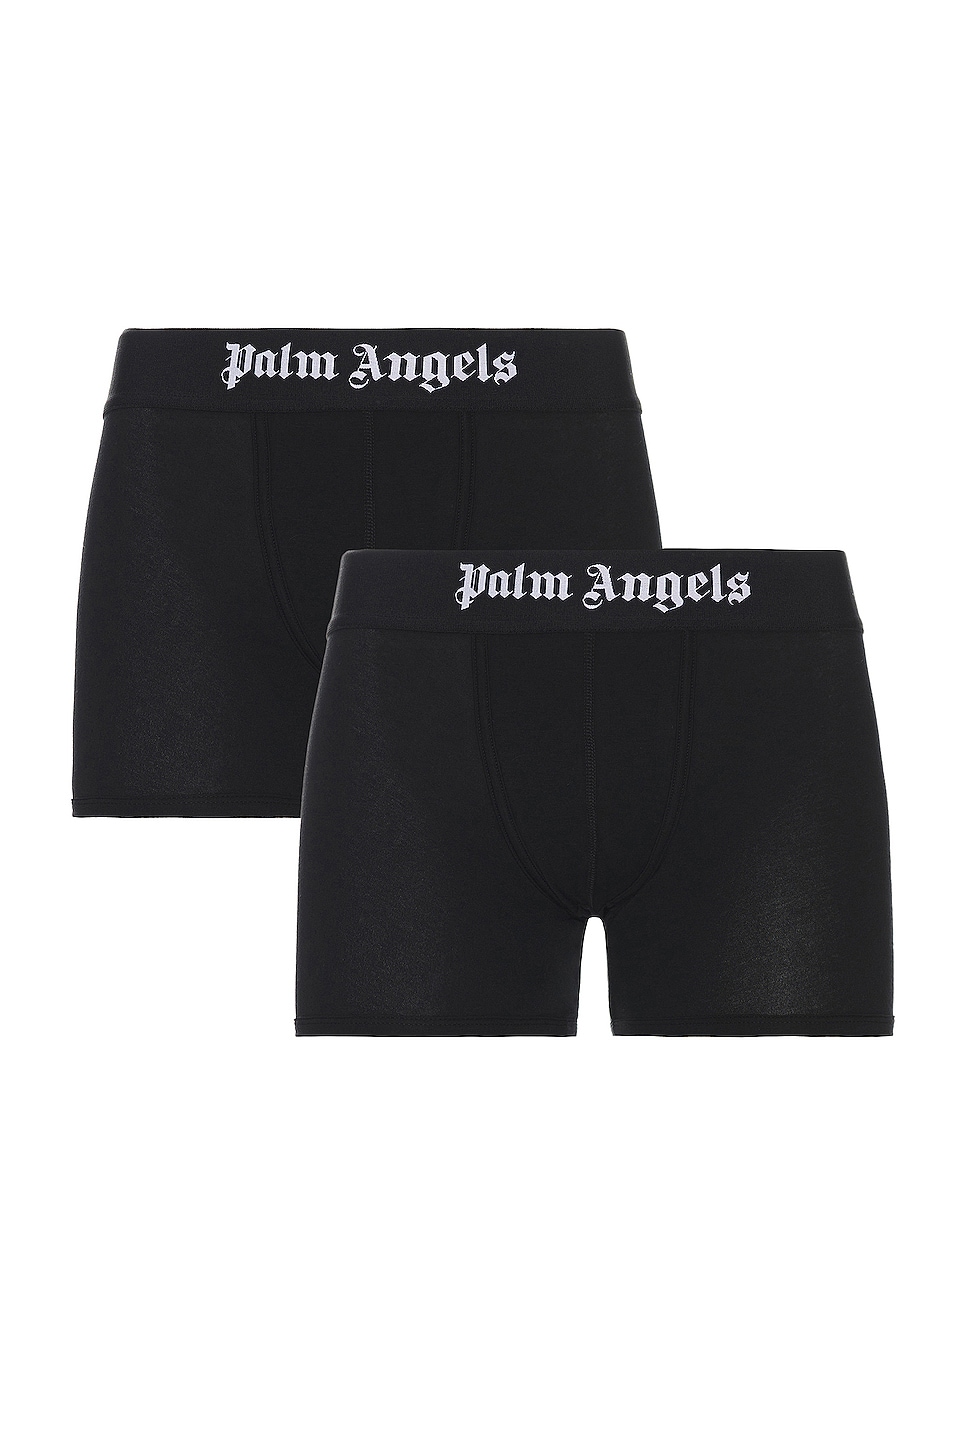 Image 1 of Palm Angels Bb Boxers Bi Pack in Black